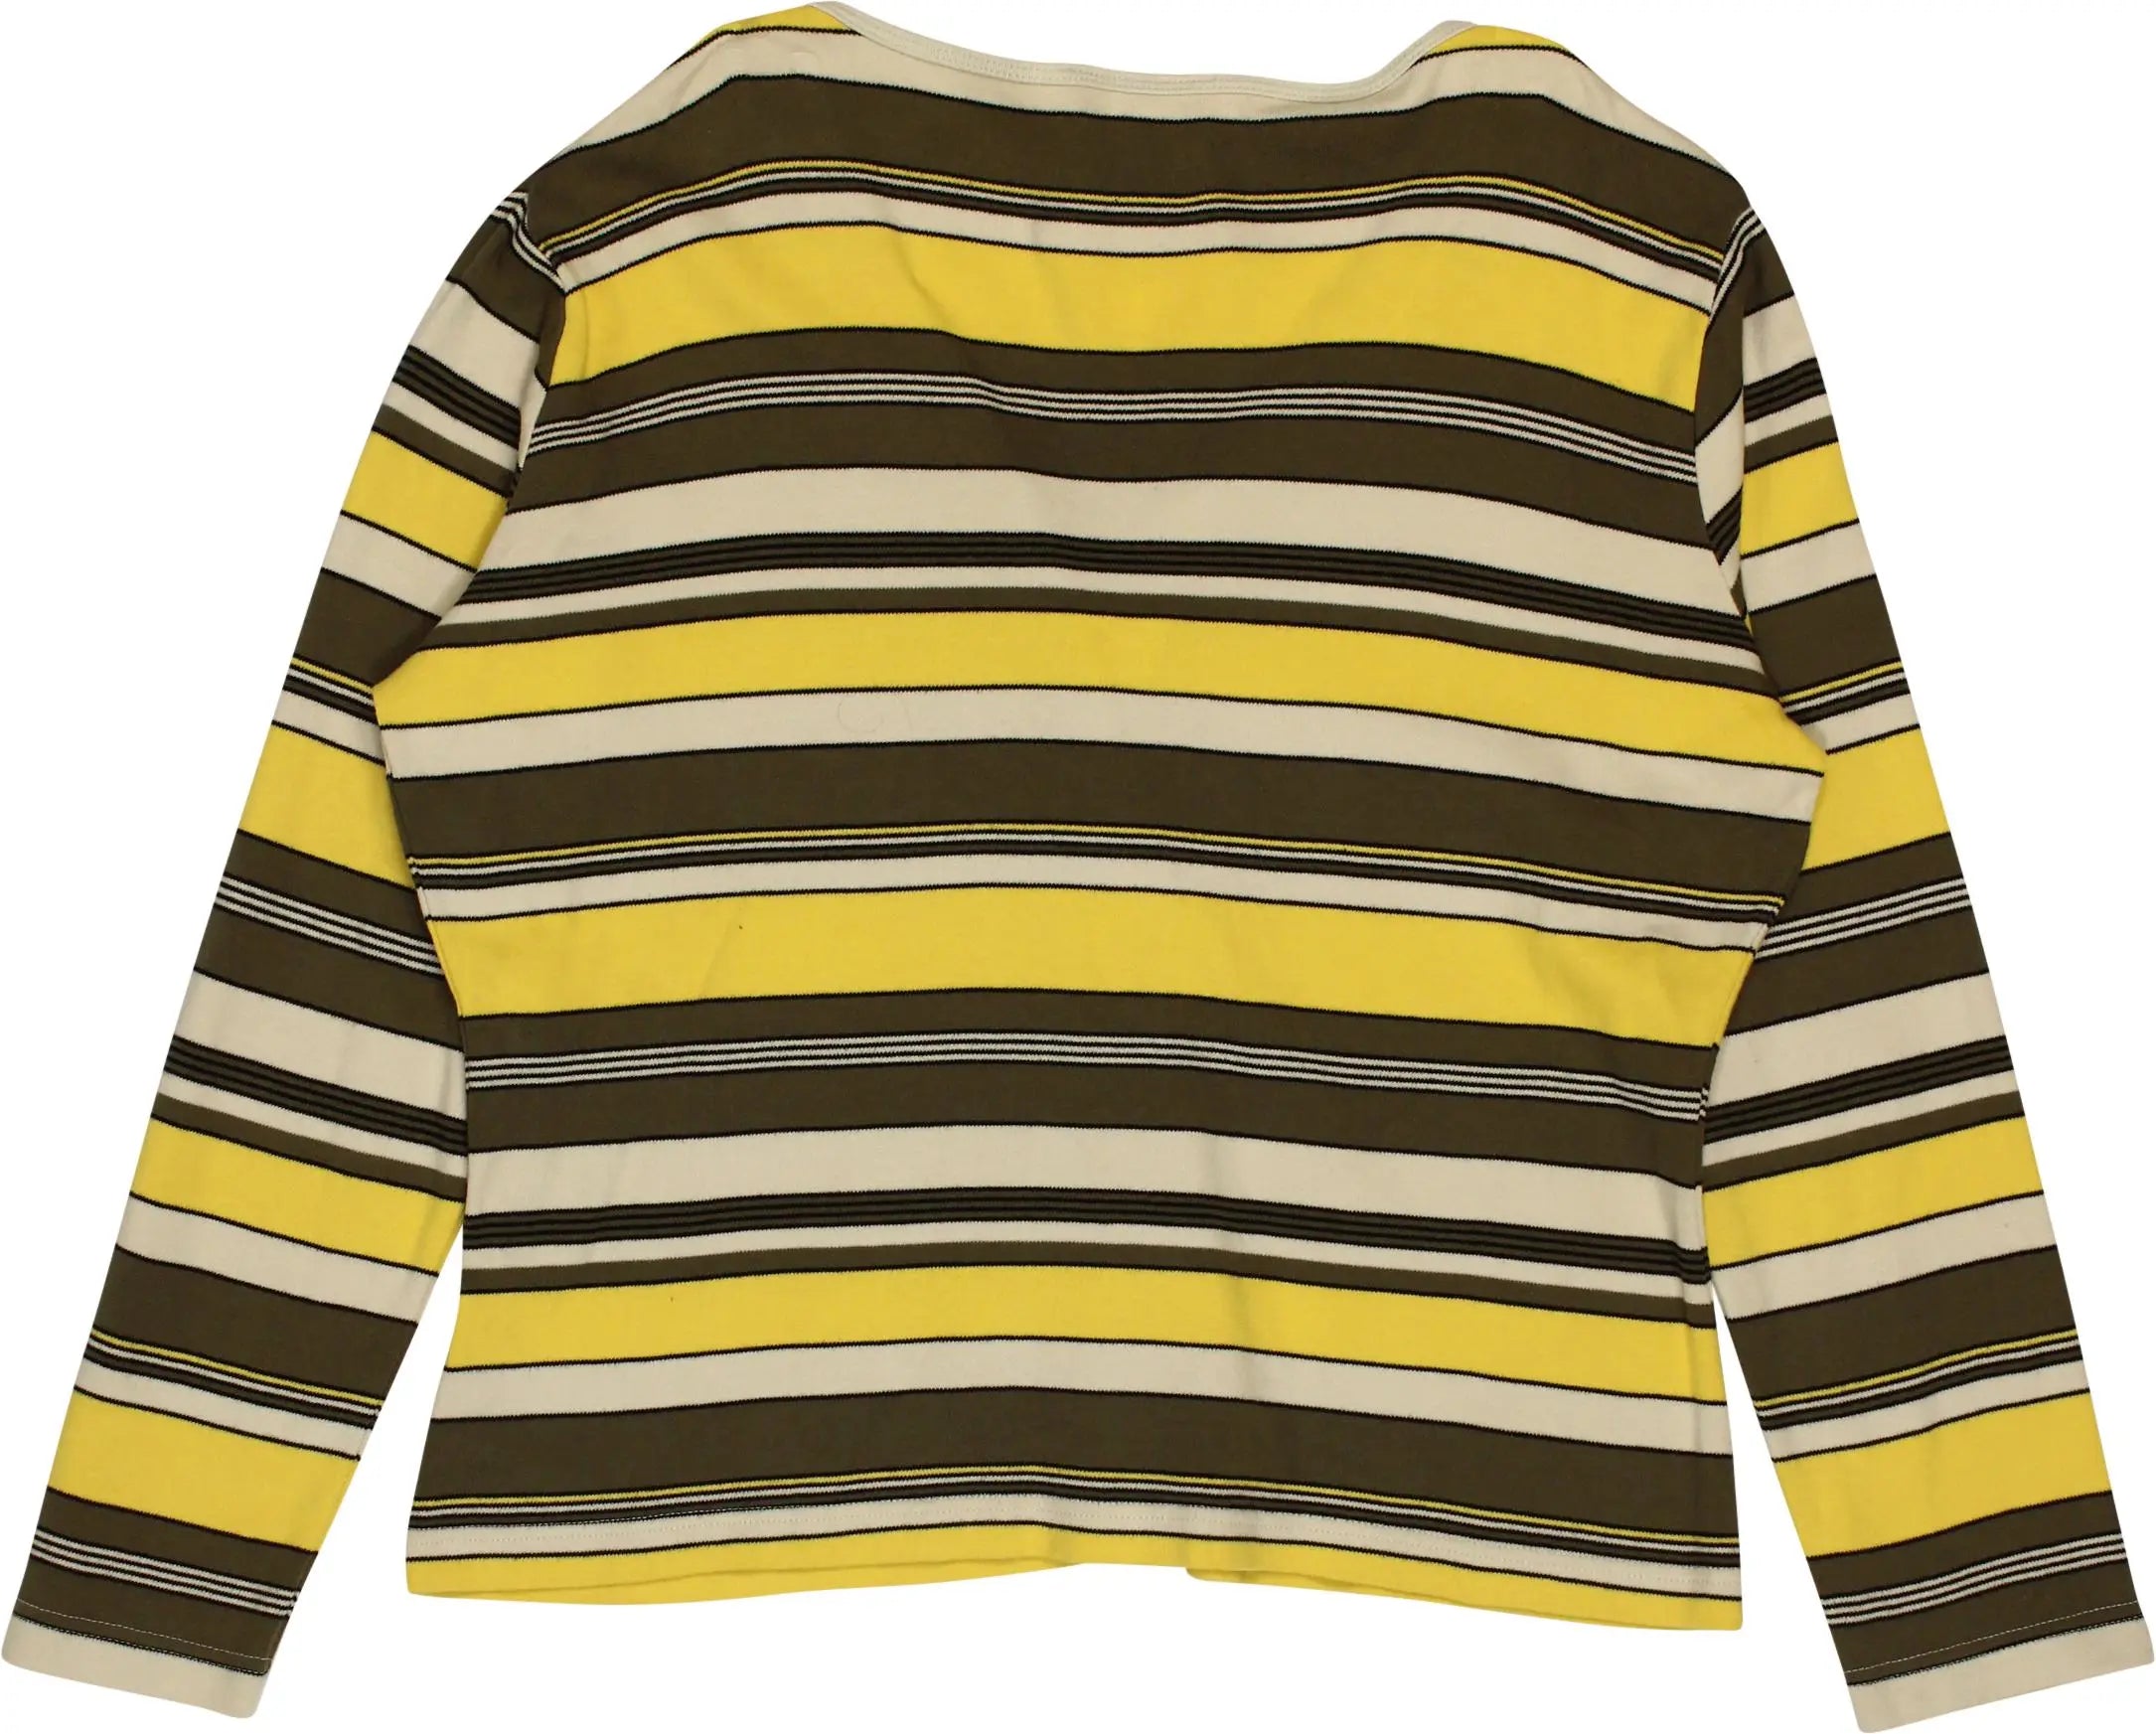 Trend Lines - Yellow Striped Cardigan- ThriftTale.com - Vintage and second handclothing